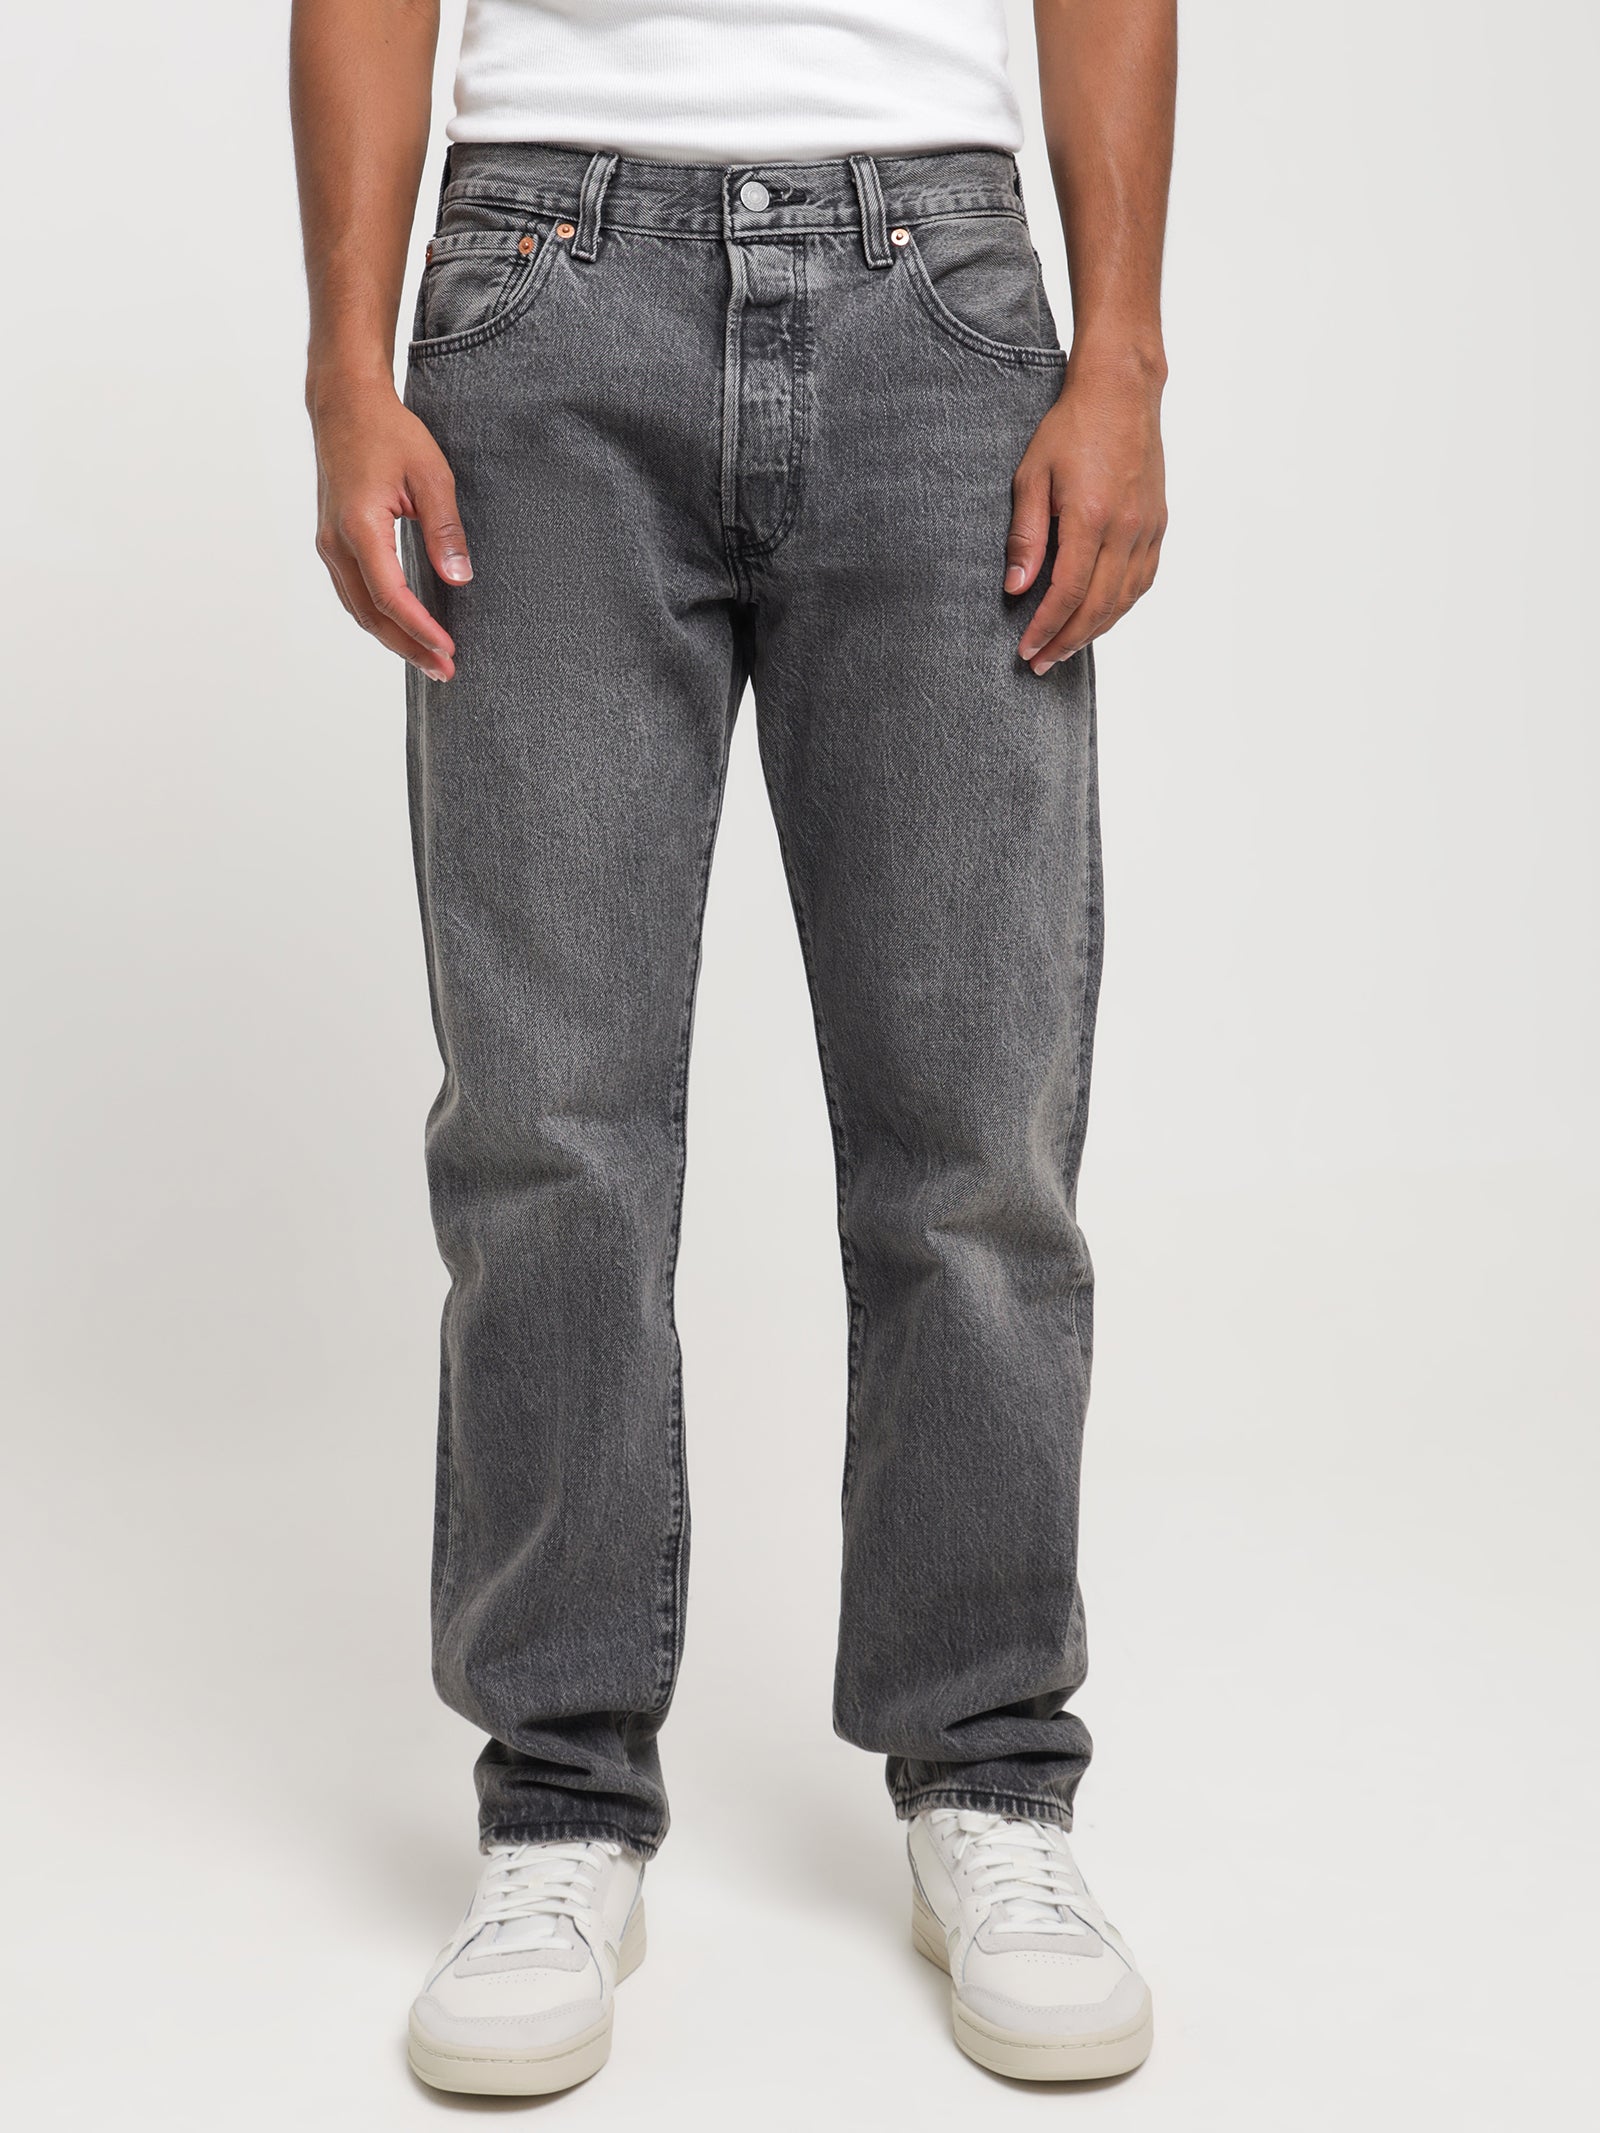 501 93 Straight Jeans in Grey - Glue Store